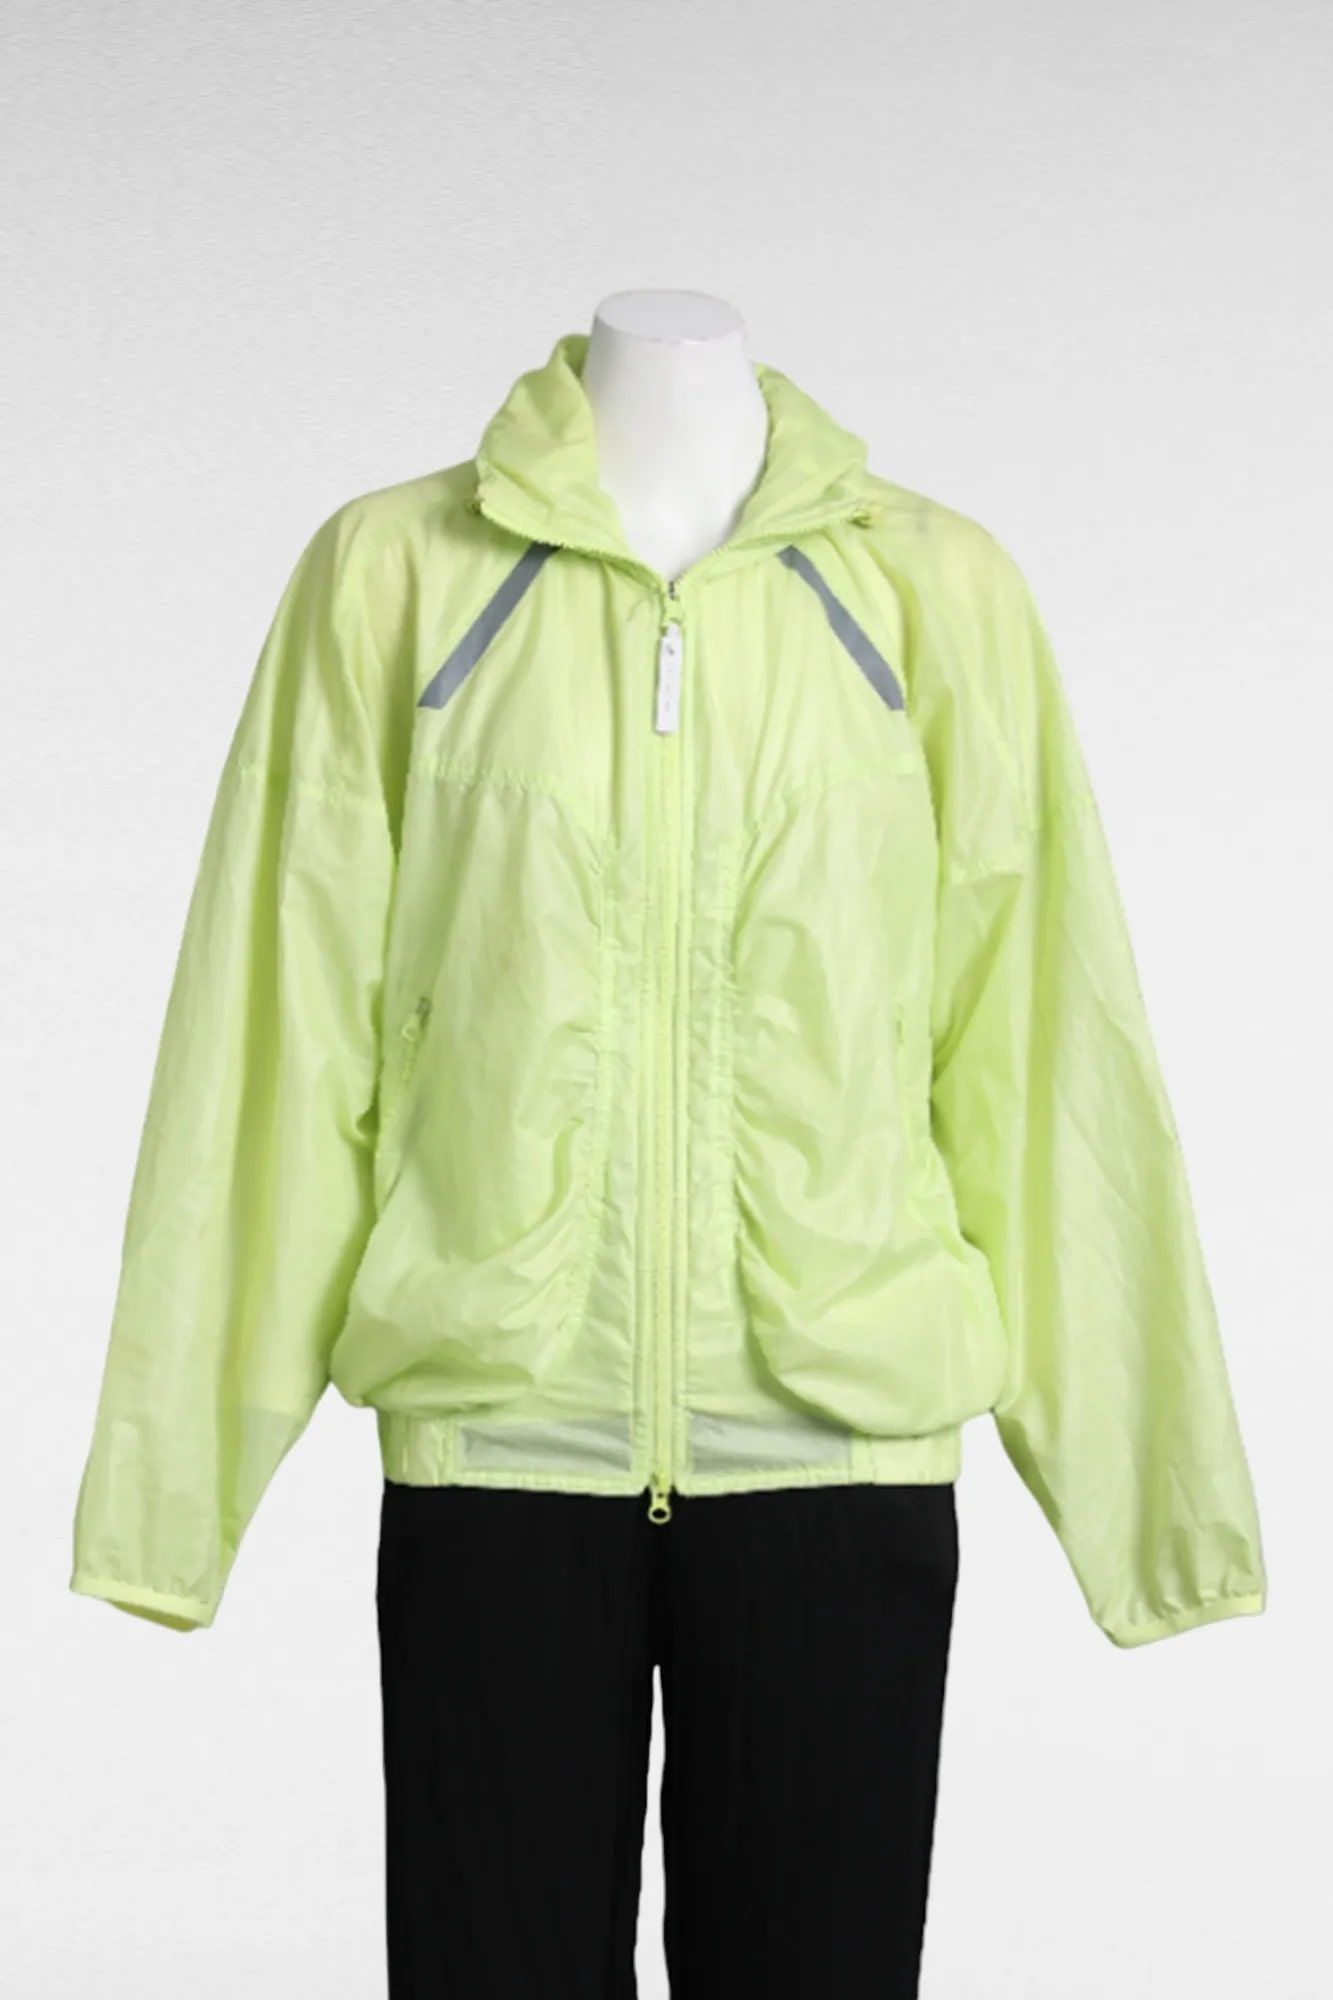 Neon Green Running Sports Jacket by Adidas by Stella McCartney, available for purchase